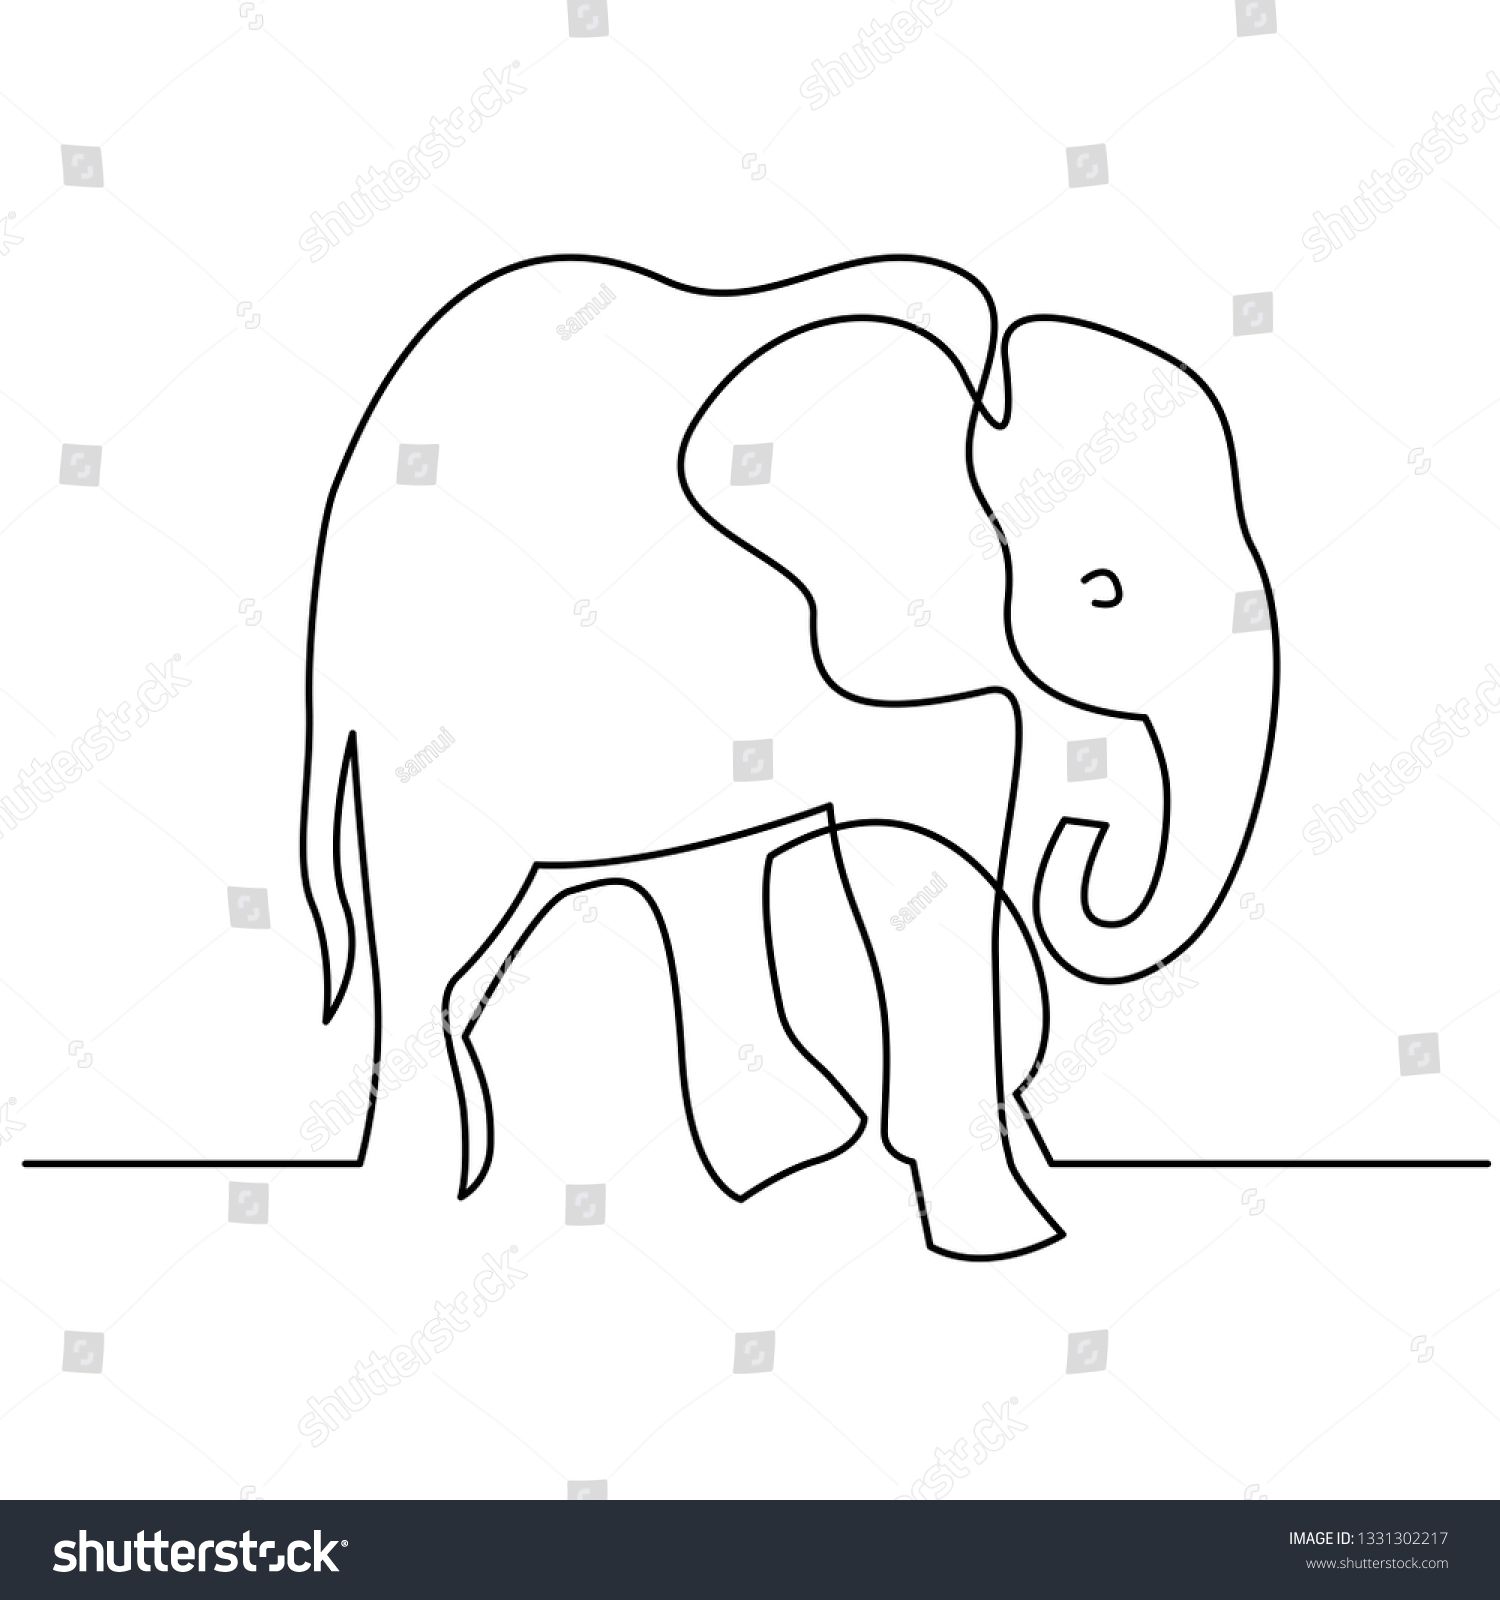 Elephant continuous one.